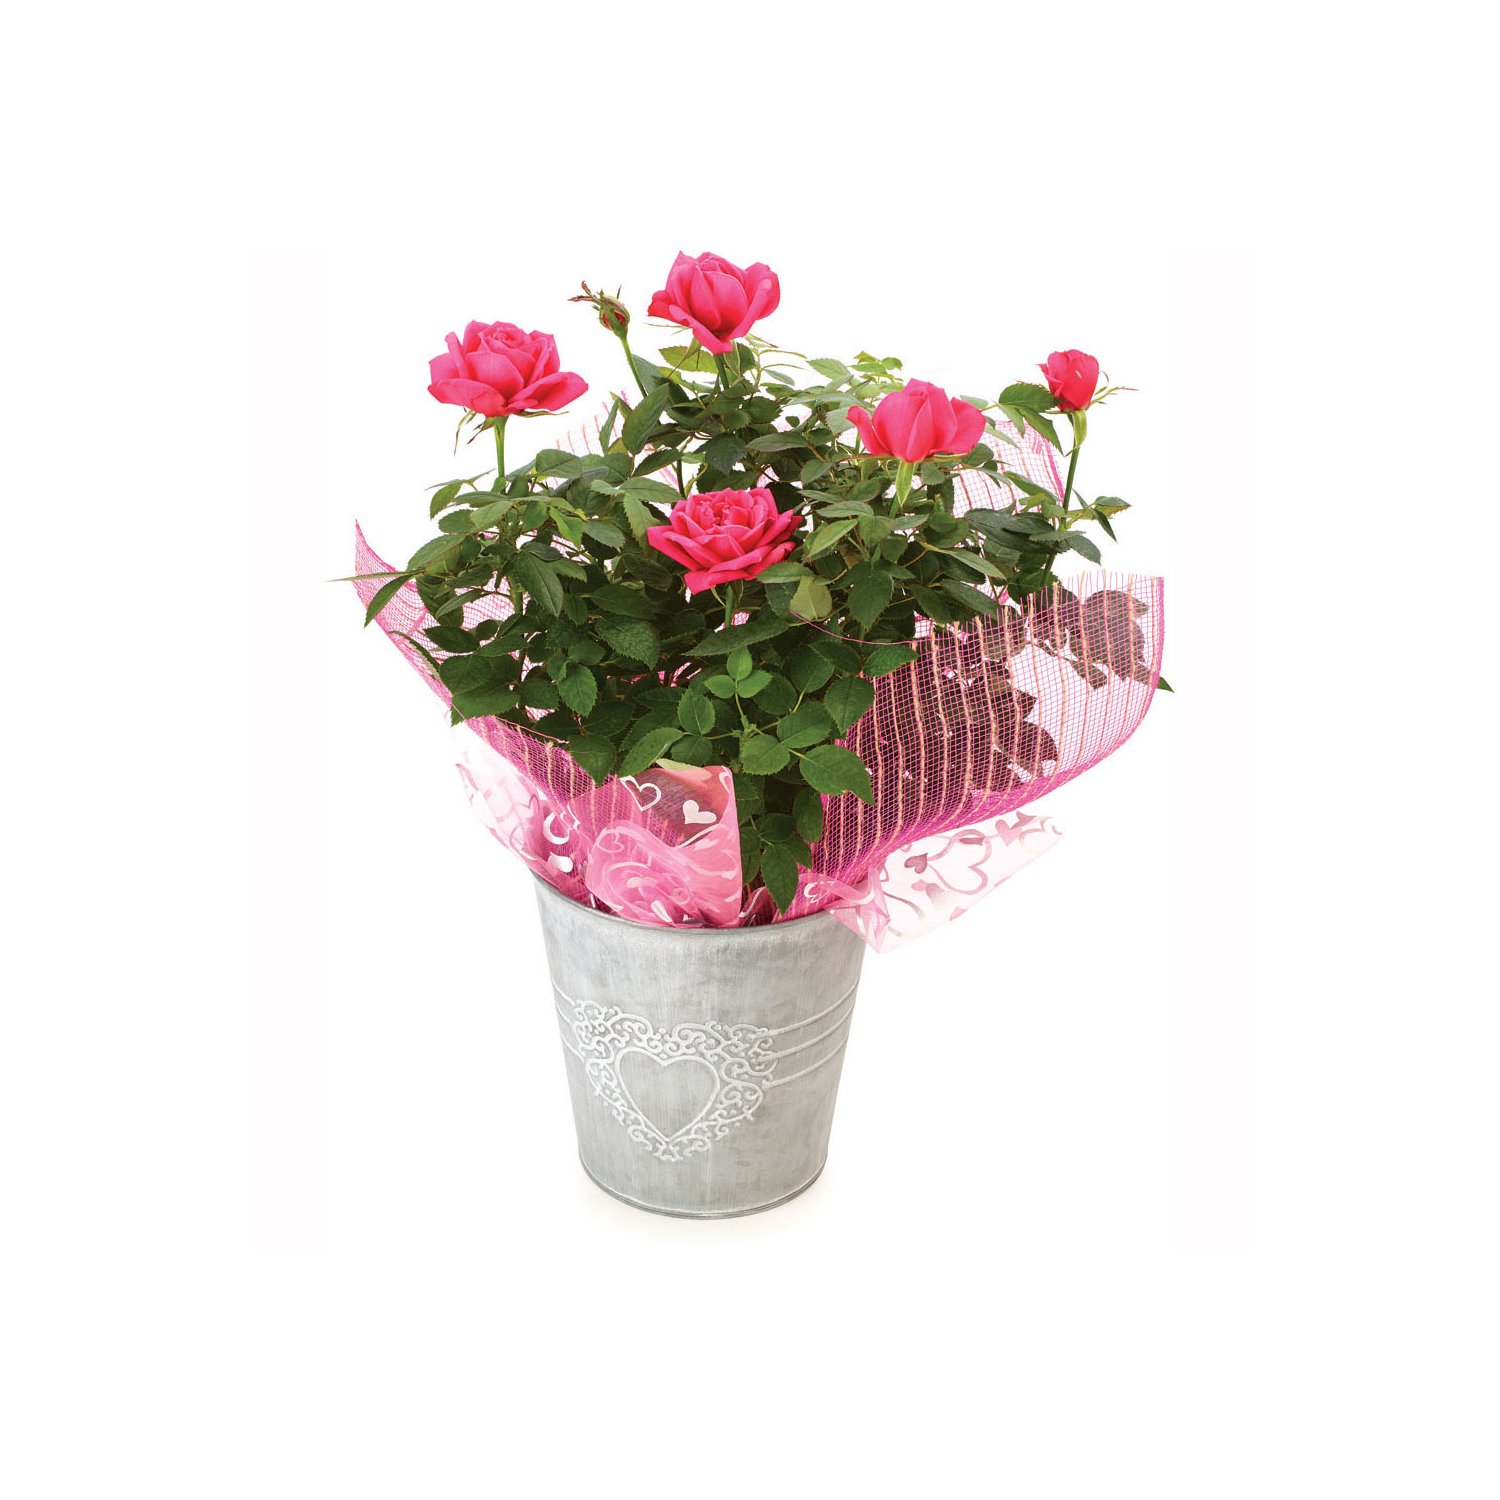 French Lace - 2 Quart Rose Potted Live Plant – Ma Cherie Roses